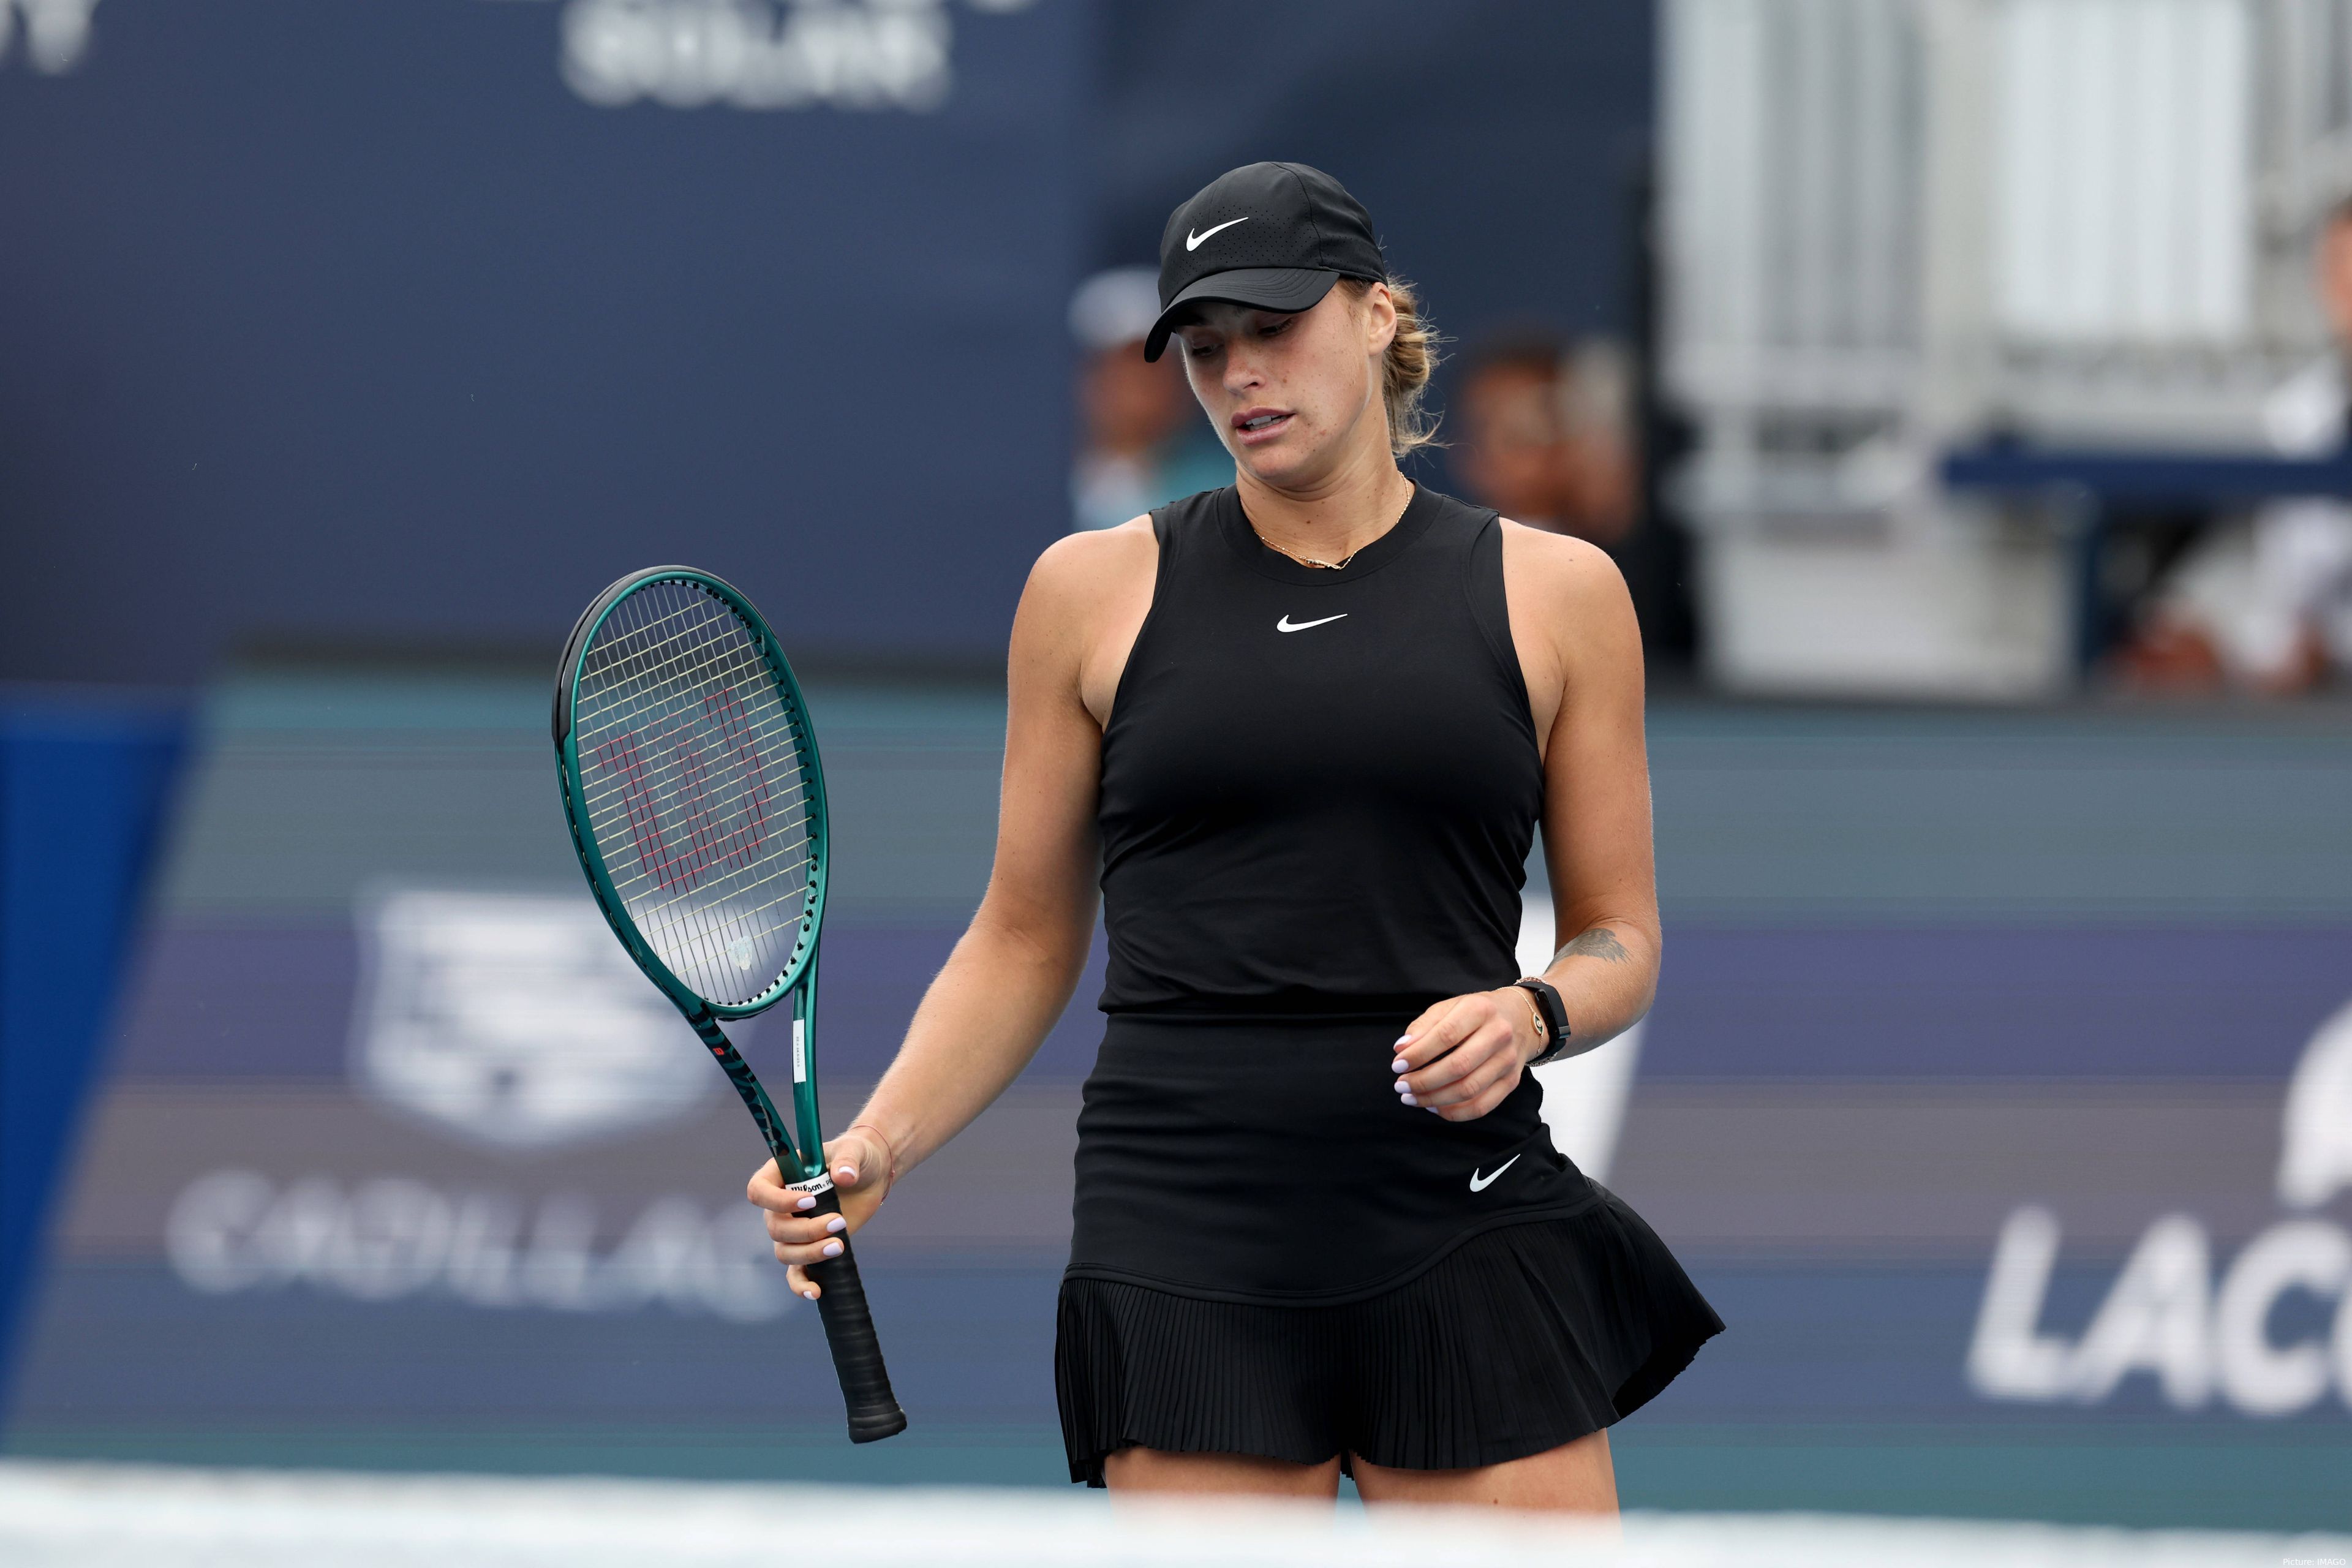 Aryna Sabalenka has faced Paula Badosa three times in the past few months including after the passing of her ex-boyfriend Konstantin Koltsov in Miami.